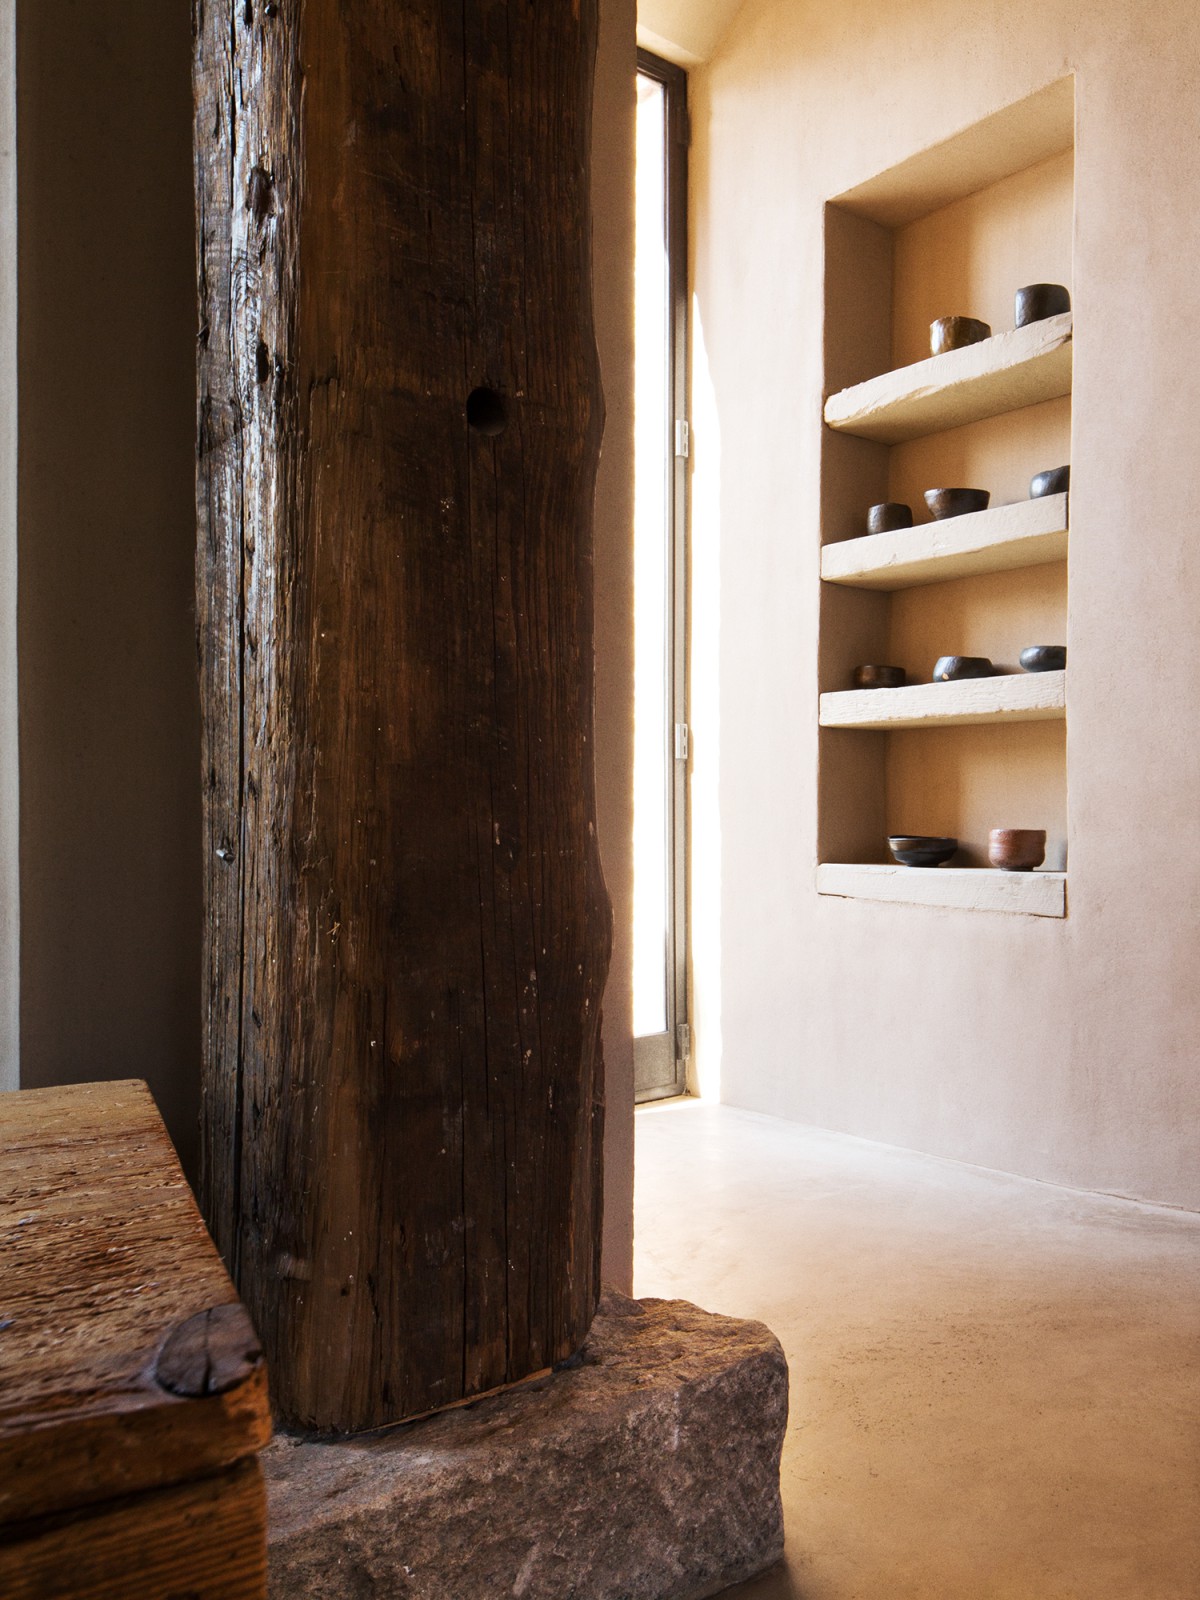 Detail of column and shelving in the Tribeca Penthouse